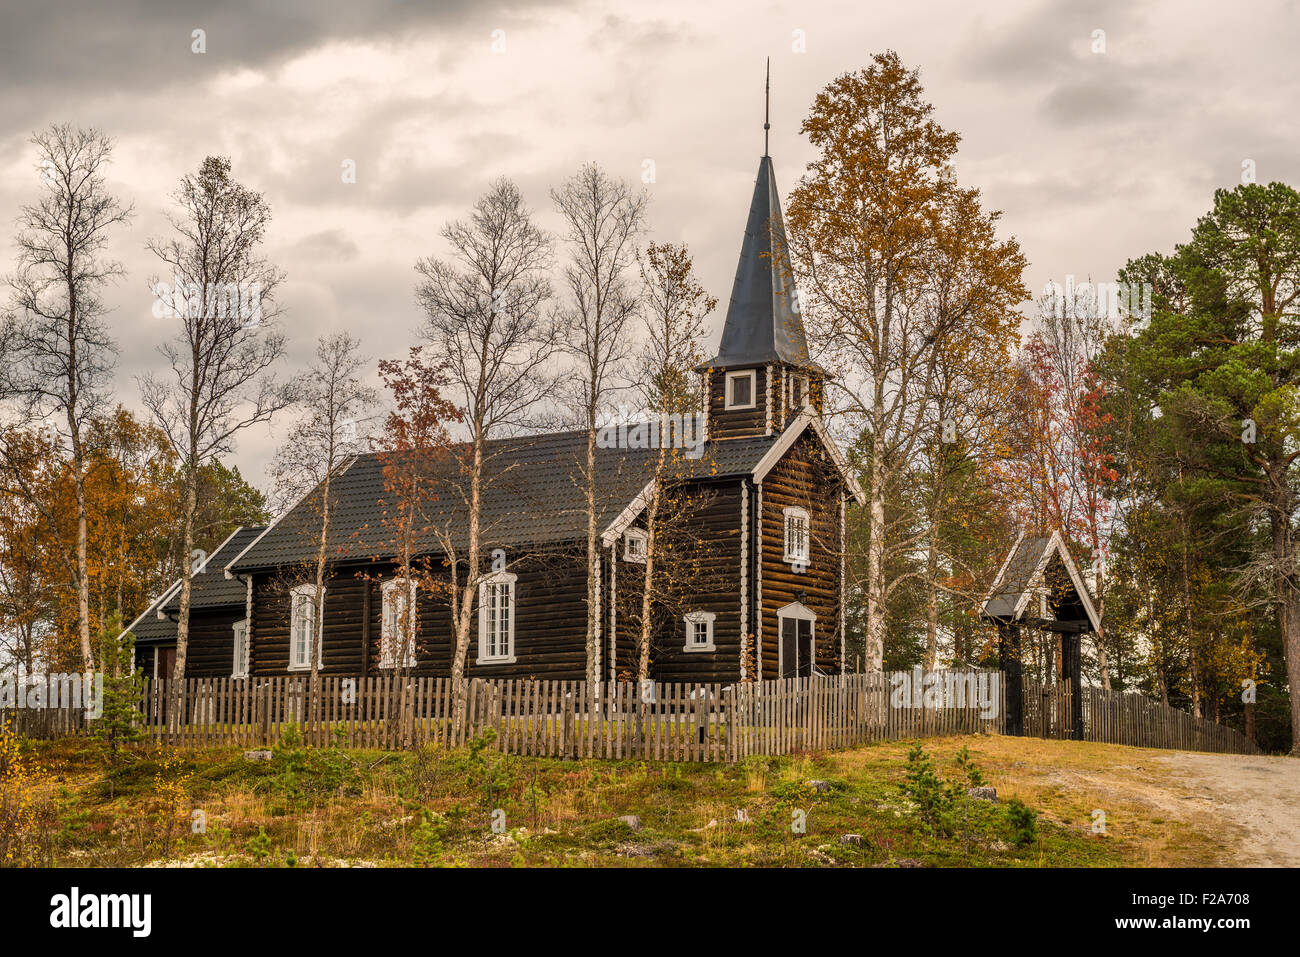 Historic church in Somadal, Hedmark, Norway set in an autumn setting. Stock Photo